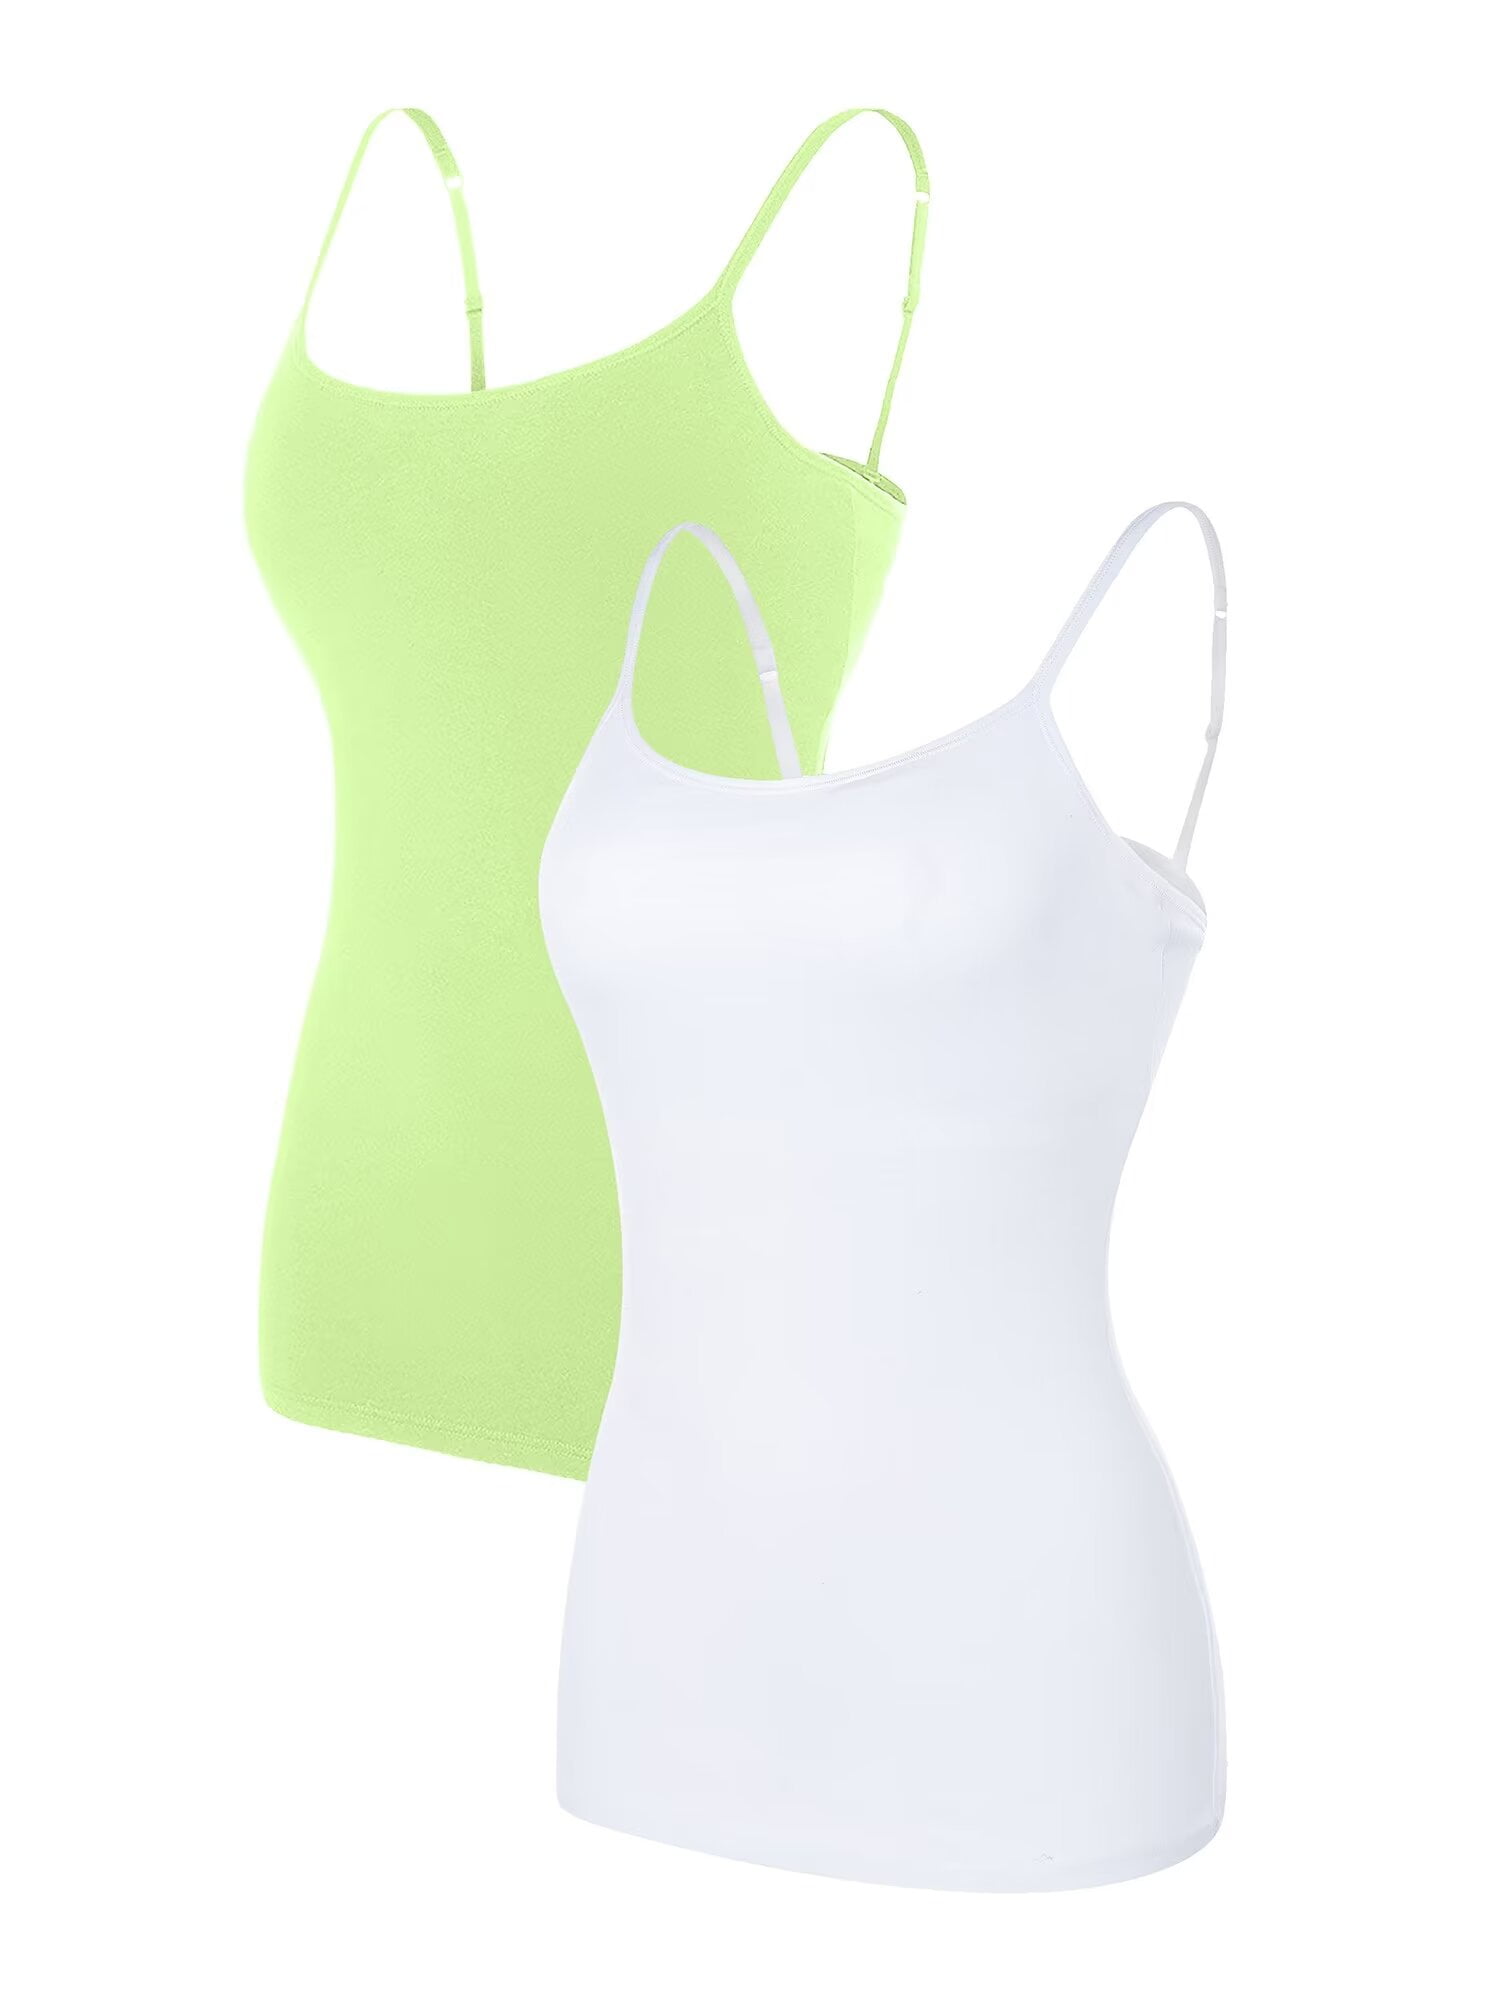 Tank Top with Built in Bra Camisole - Wowelo - Your Smart Online Shop